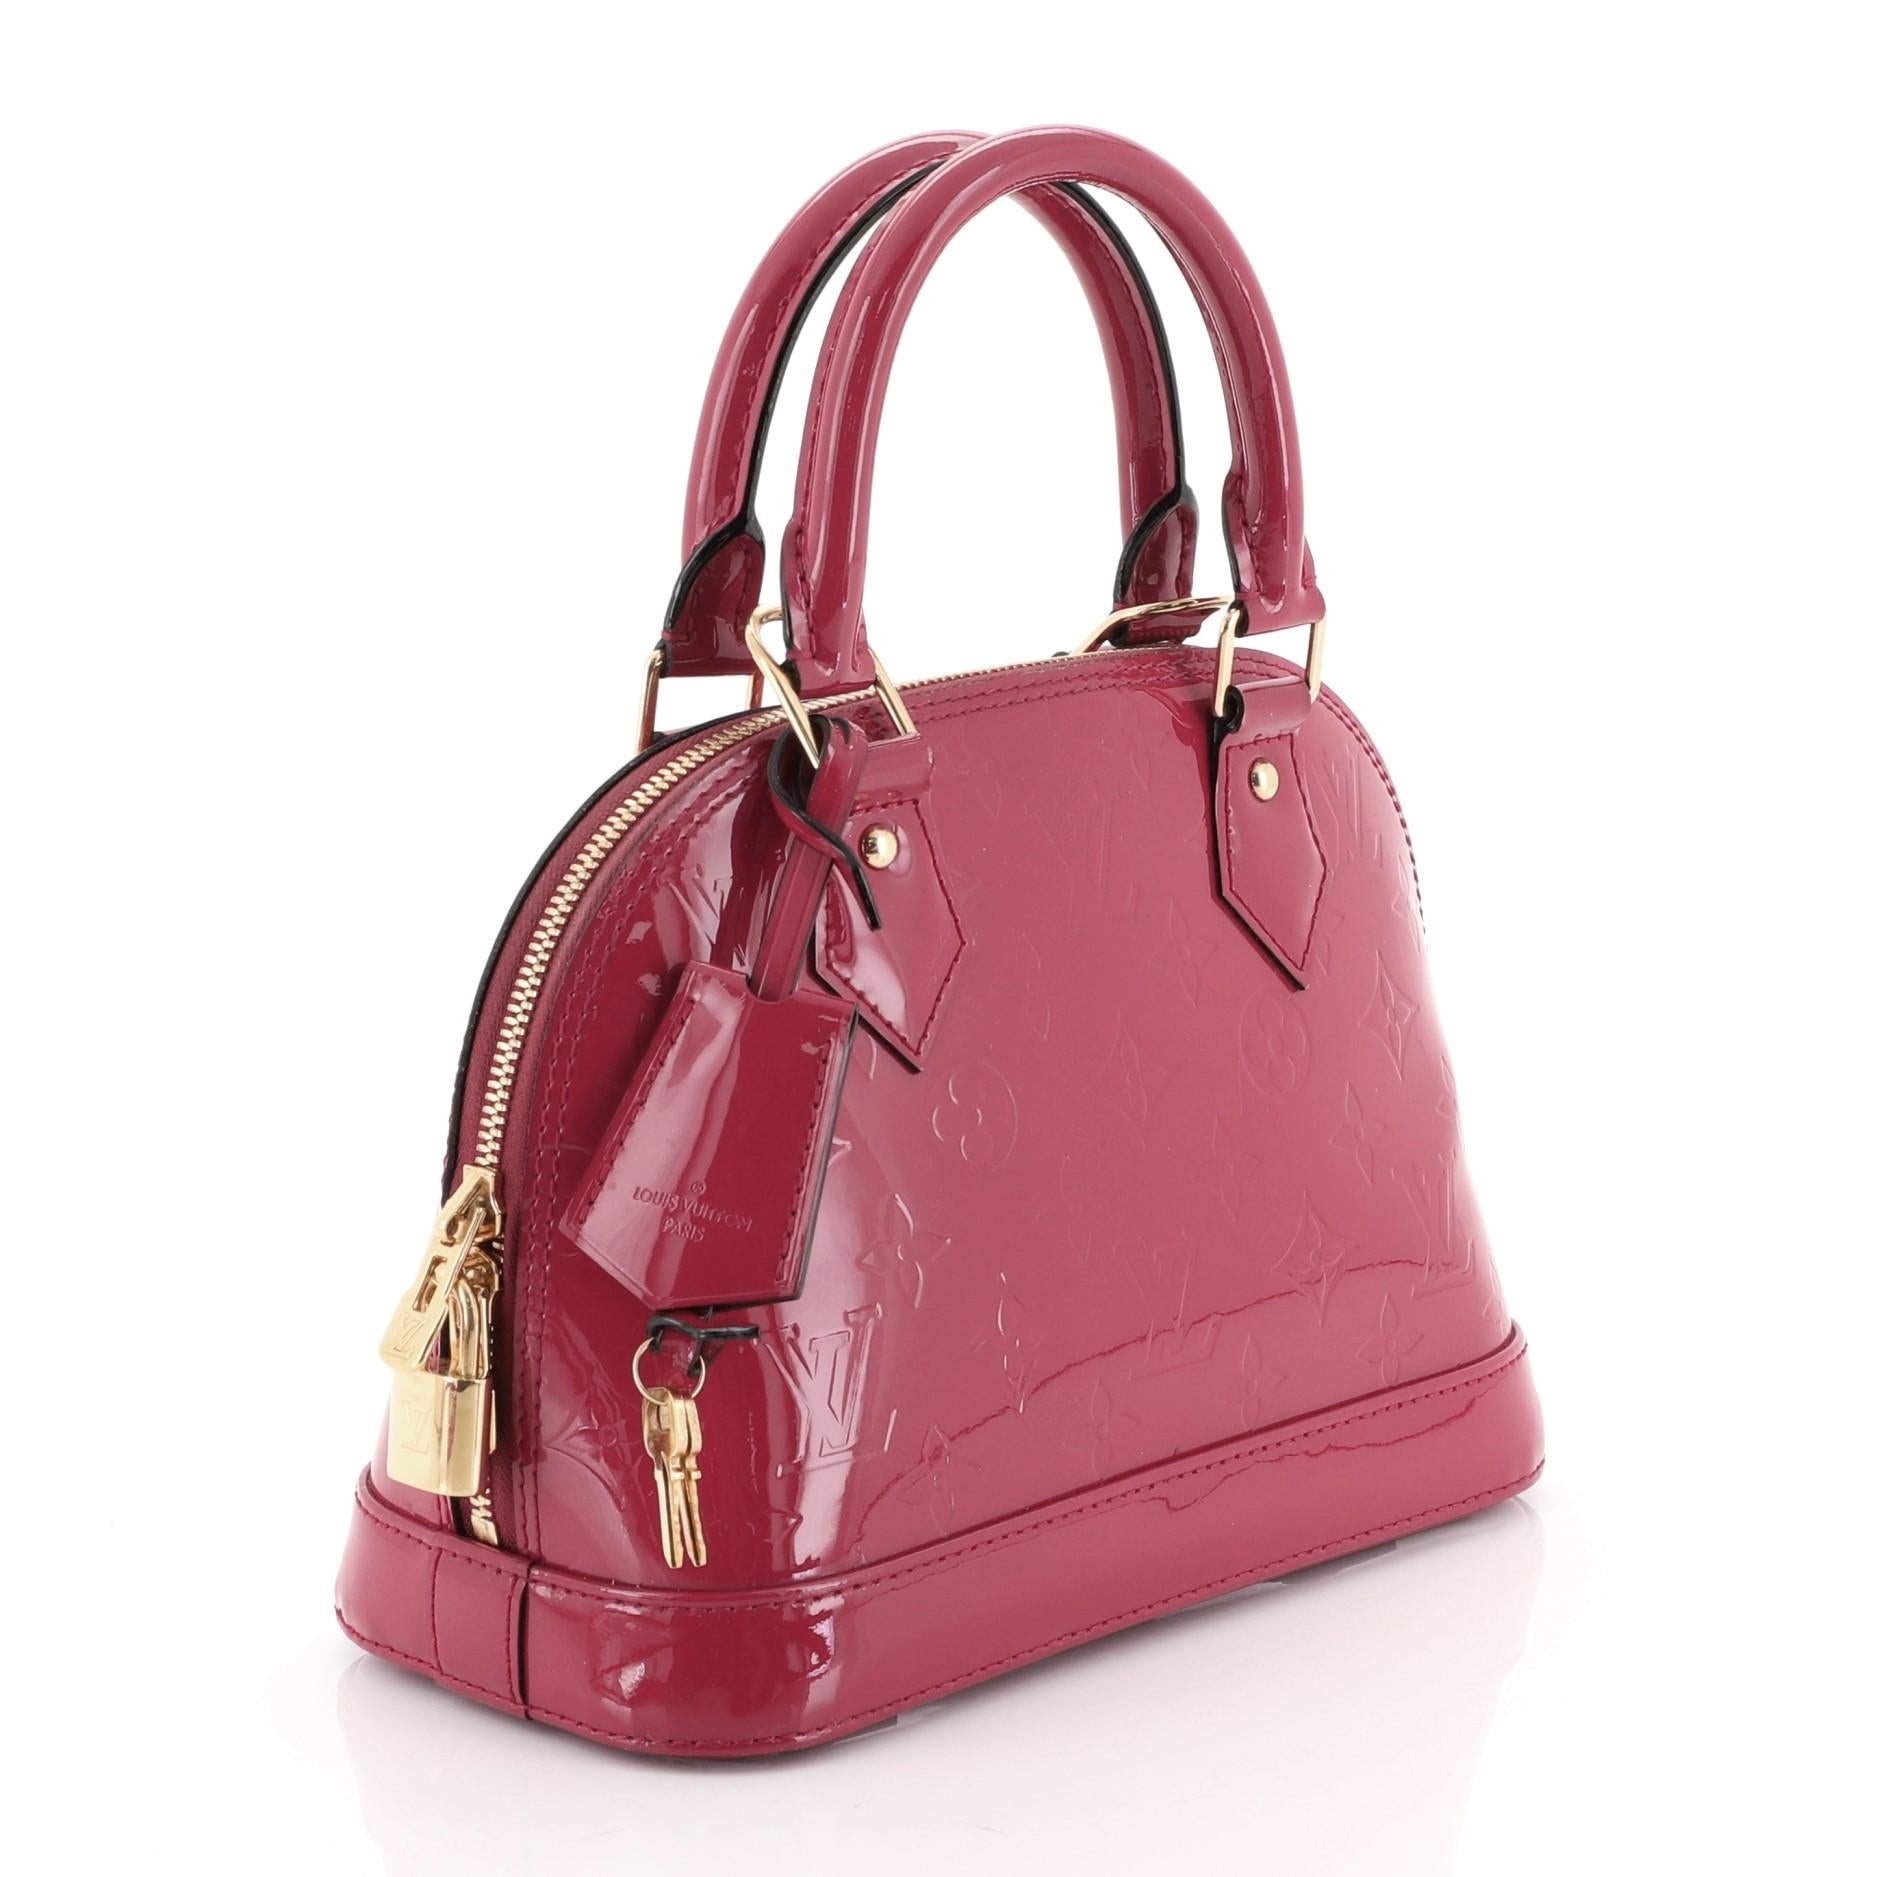 This Louis Vuitton Alma Handbag Monogram Vernis BB, crafted from pink monogram vernis leather, features dual rolled handles, protective base studs, and gold-tone hardware. Its two-way zip closure opens to a pink fabric interior with slip pocket.